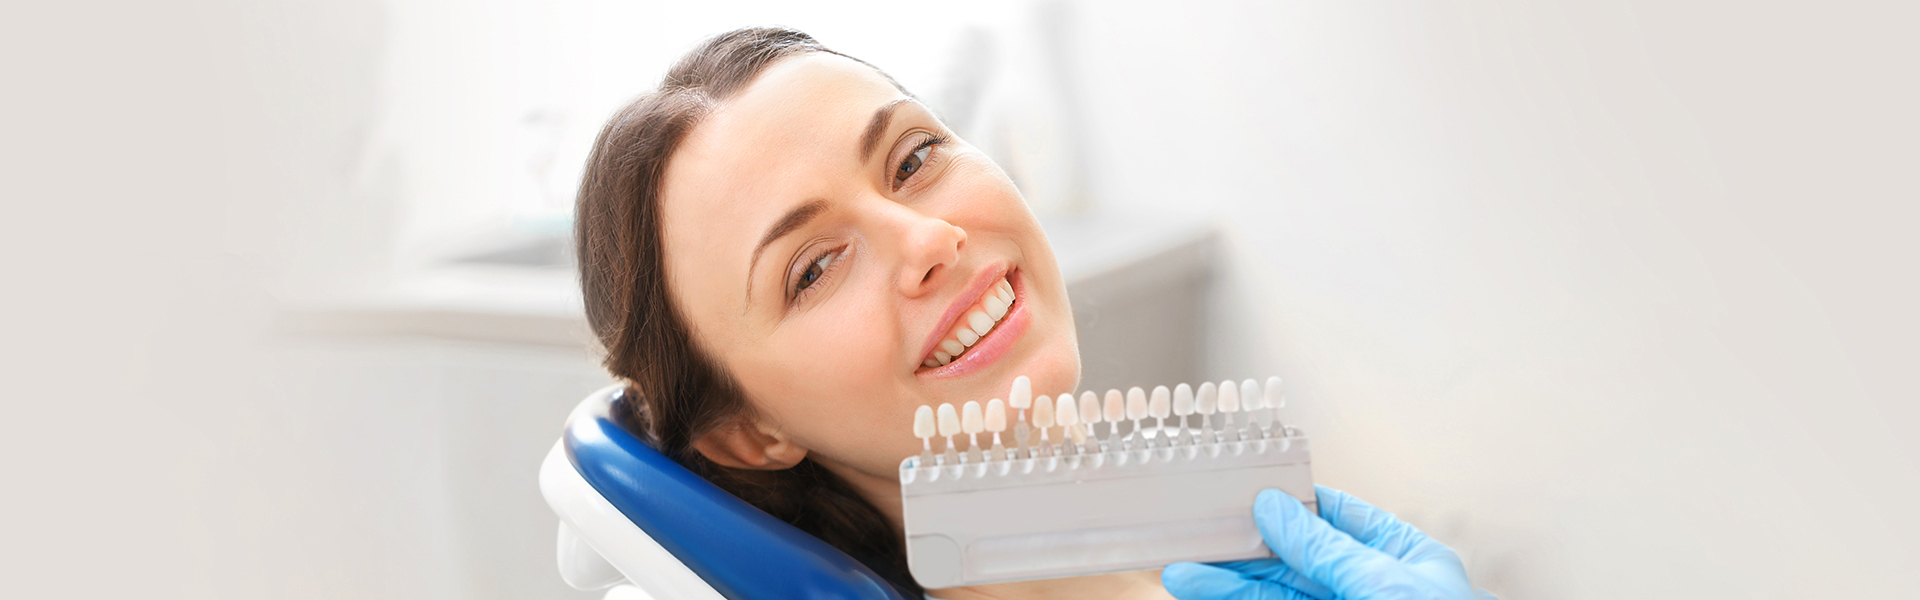 Dental Veneers Are Excellent Solutions to Conceal Imperfections with Your Teeth